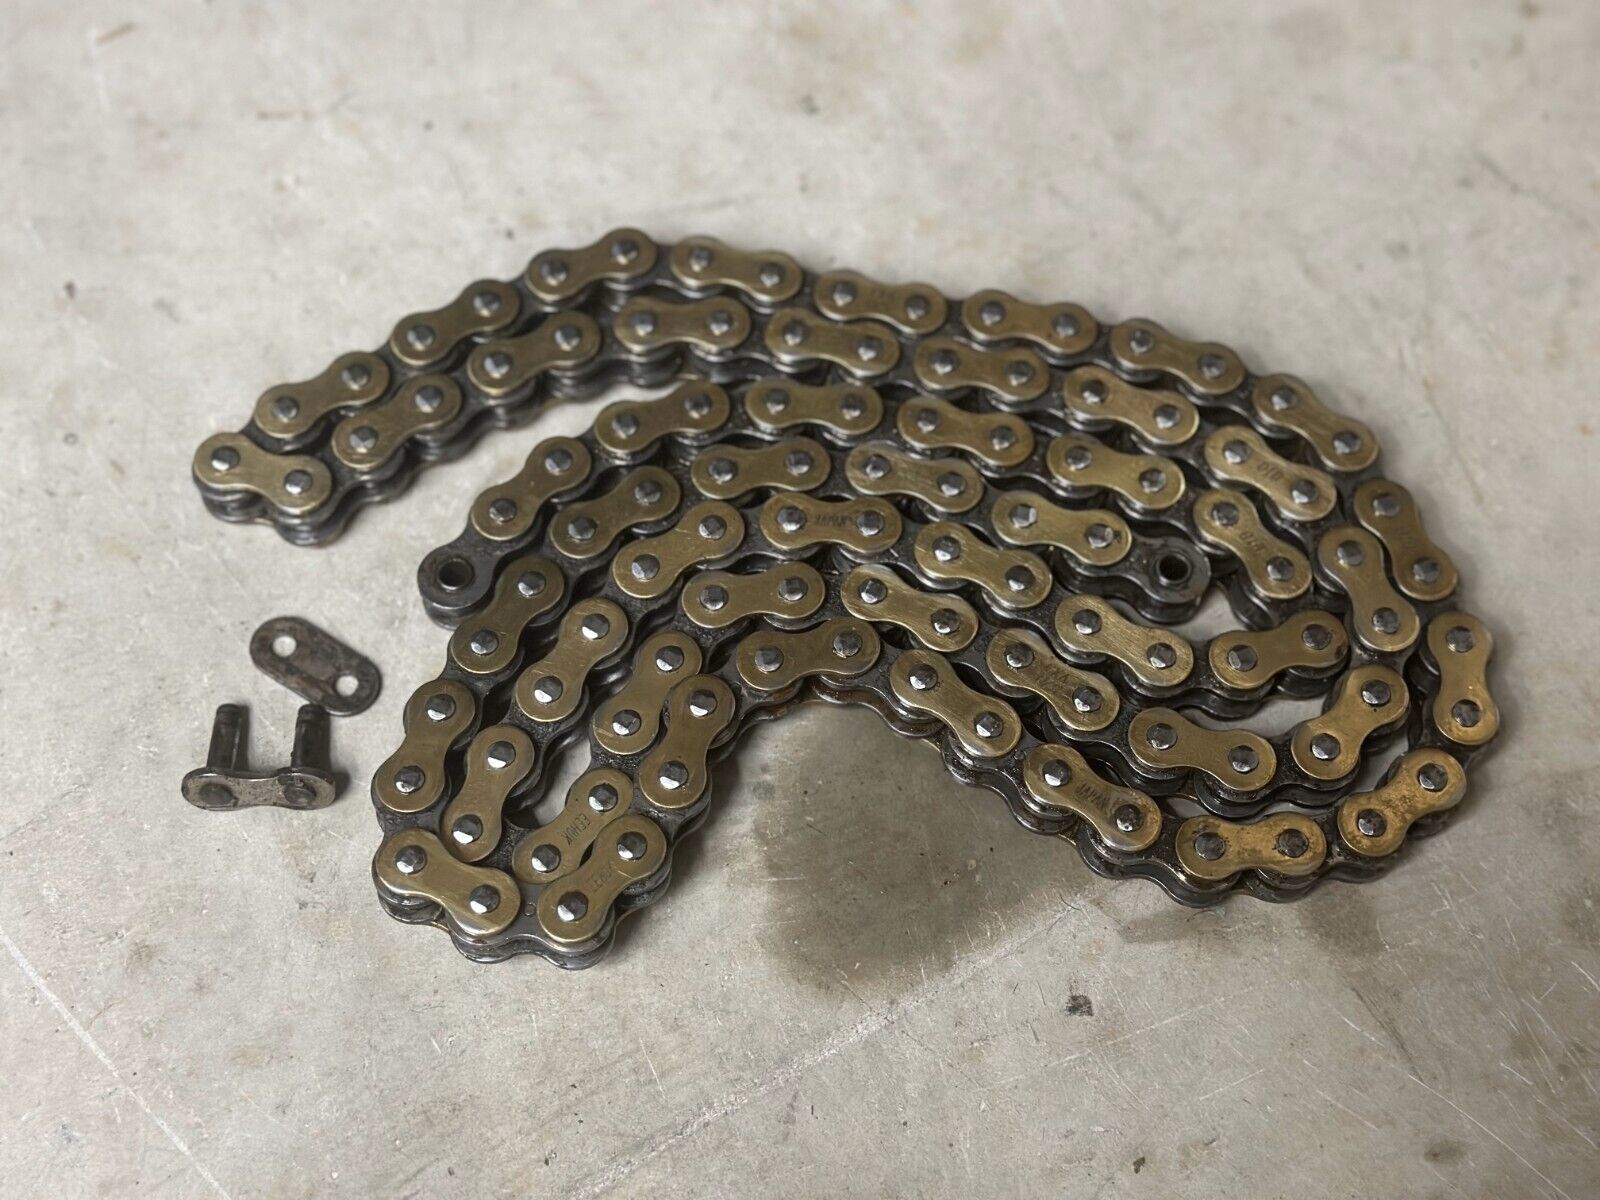 2008 Honda XR650L Chain 1993-2023 Connecting Drive Links Motorcycle Gold XR 650